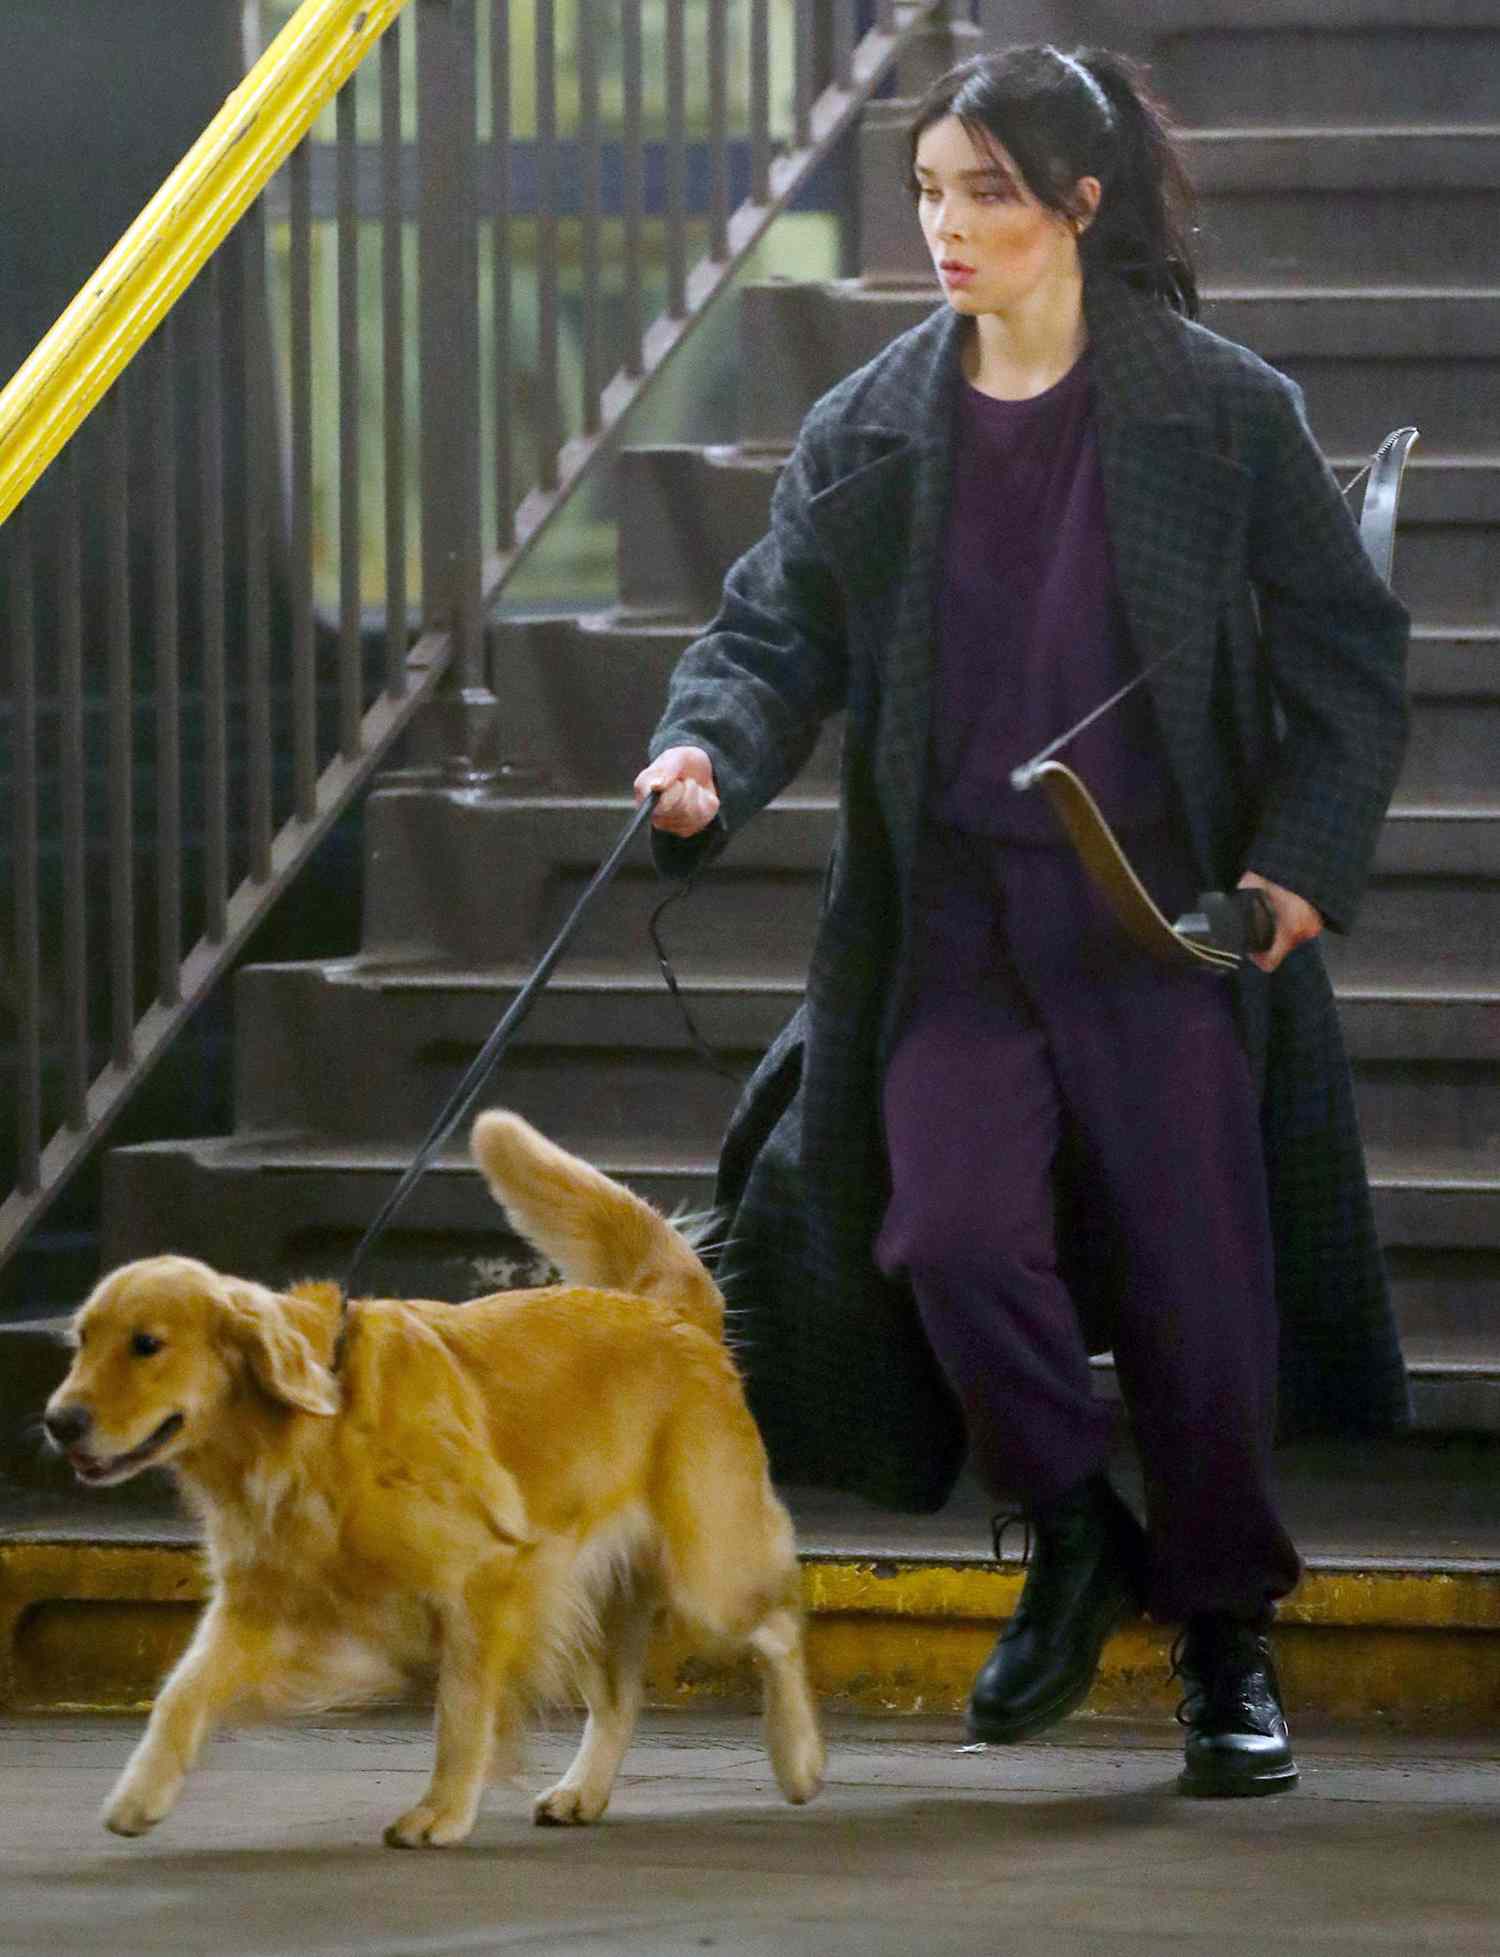 Hailee Steinfeld as 'Kate Bishop' and Jeremy Renner on set of 'Hawkeye' in New York City.